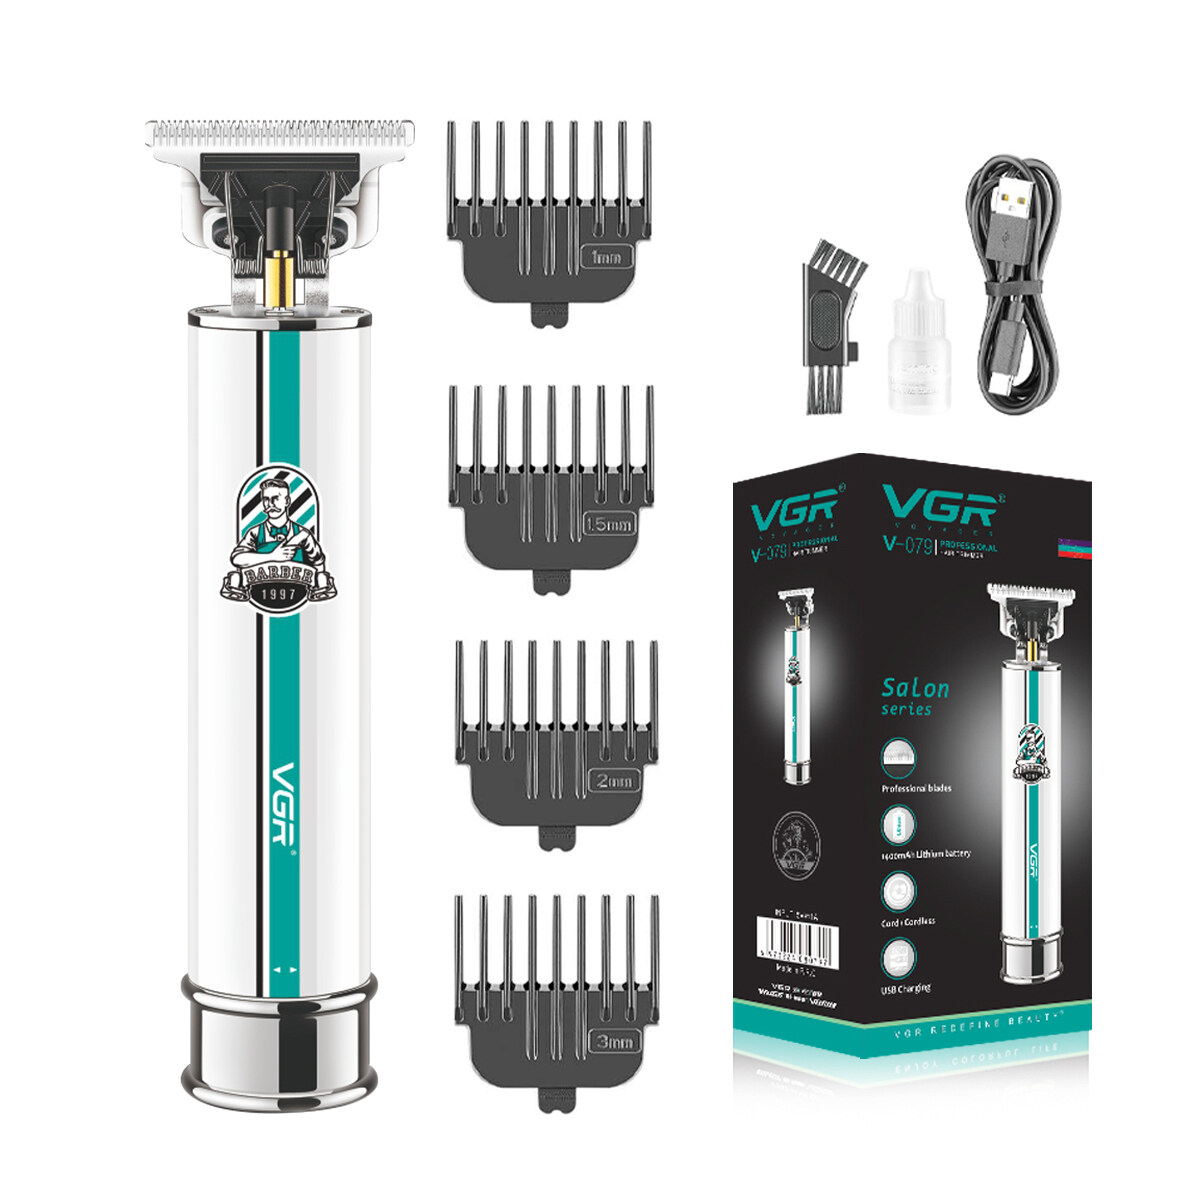 domestic use hair trimmer manufacturer, domestic use hair trimmer supplier, trimmer factories, barber hair clipper factories, cordless rechargeable hair clipper factory